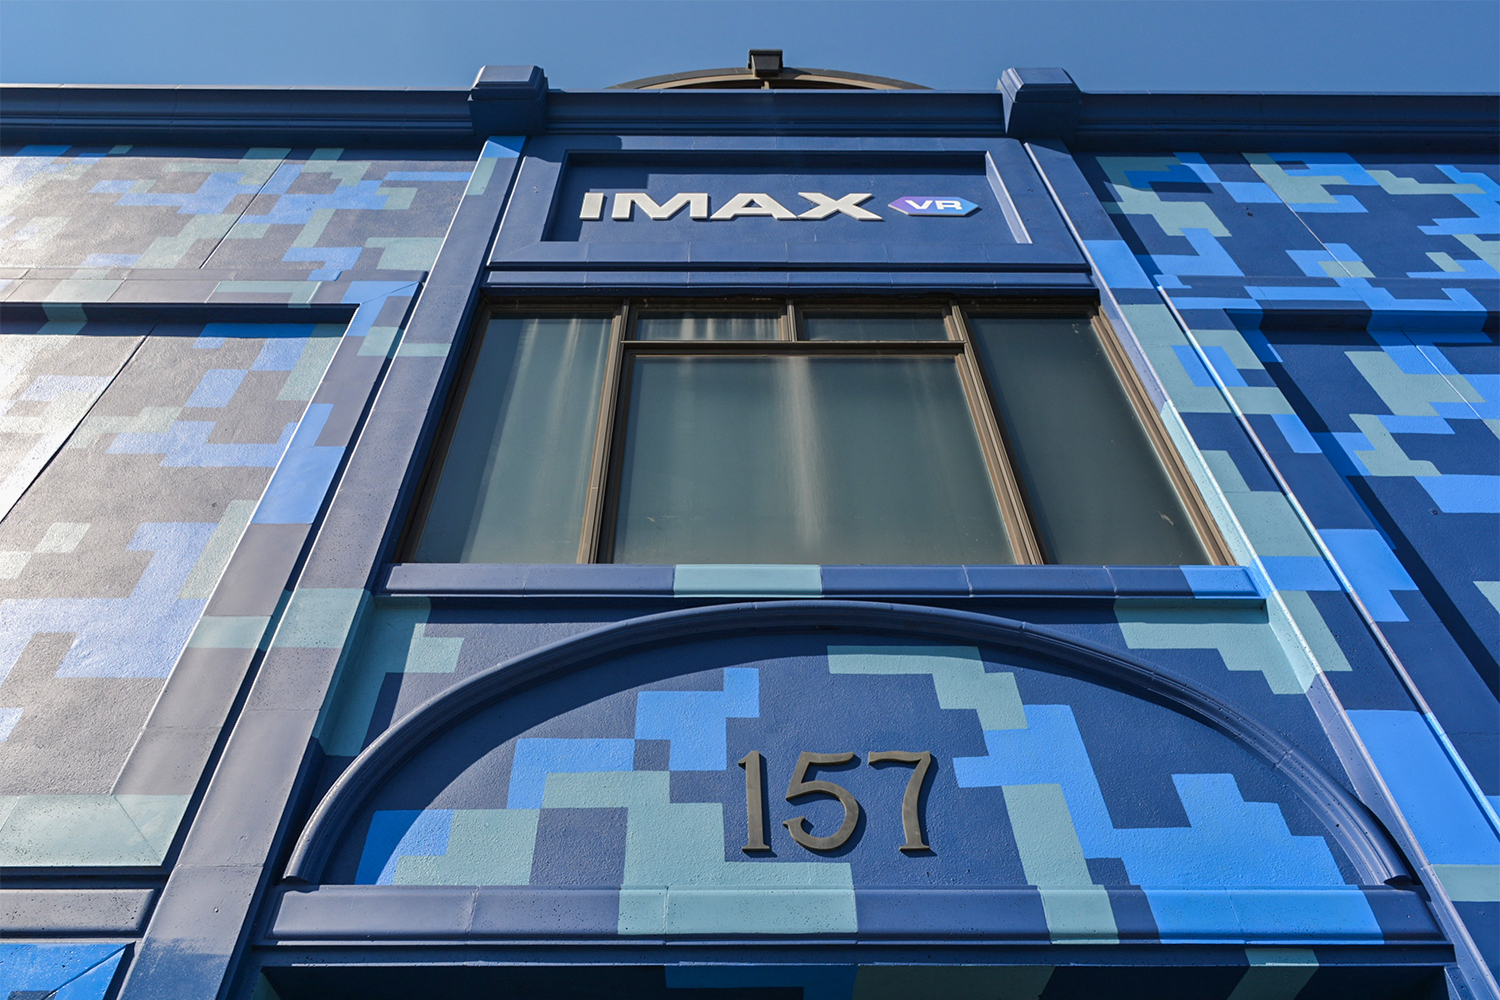 imax vr experience center opening los angeles centre 14